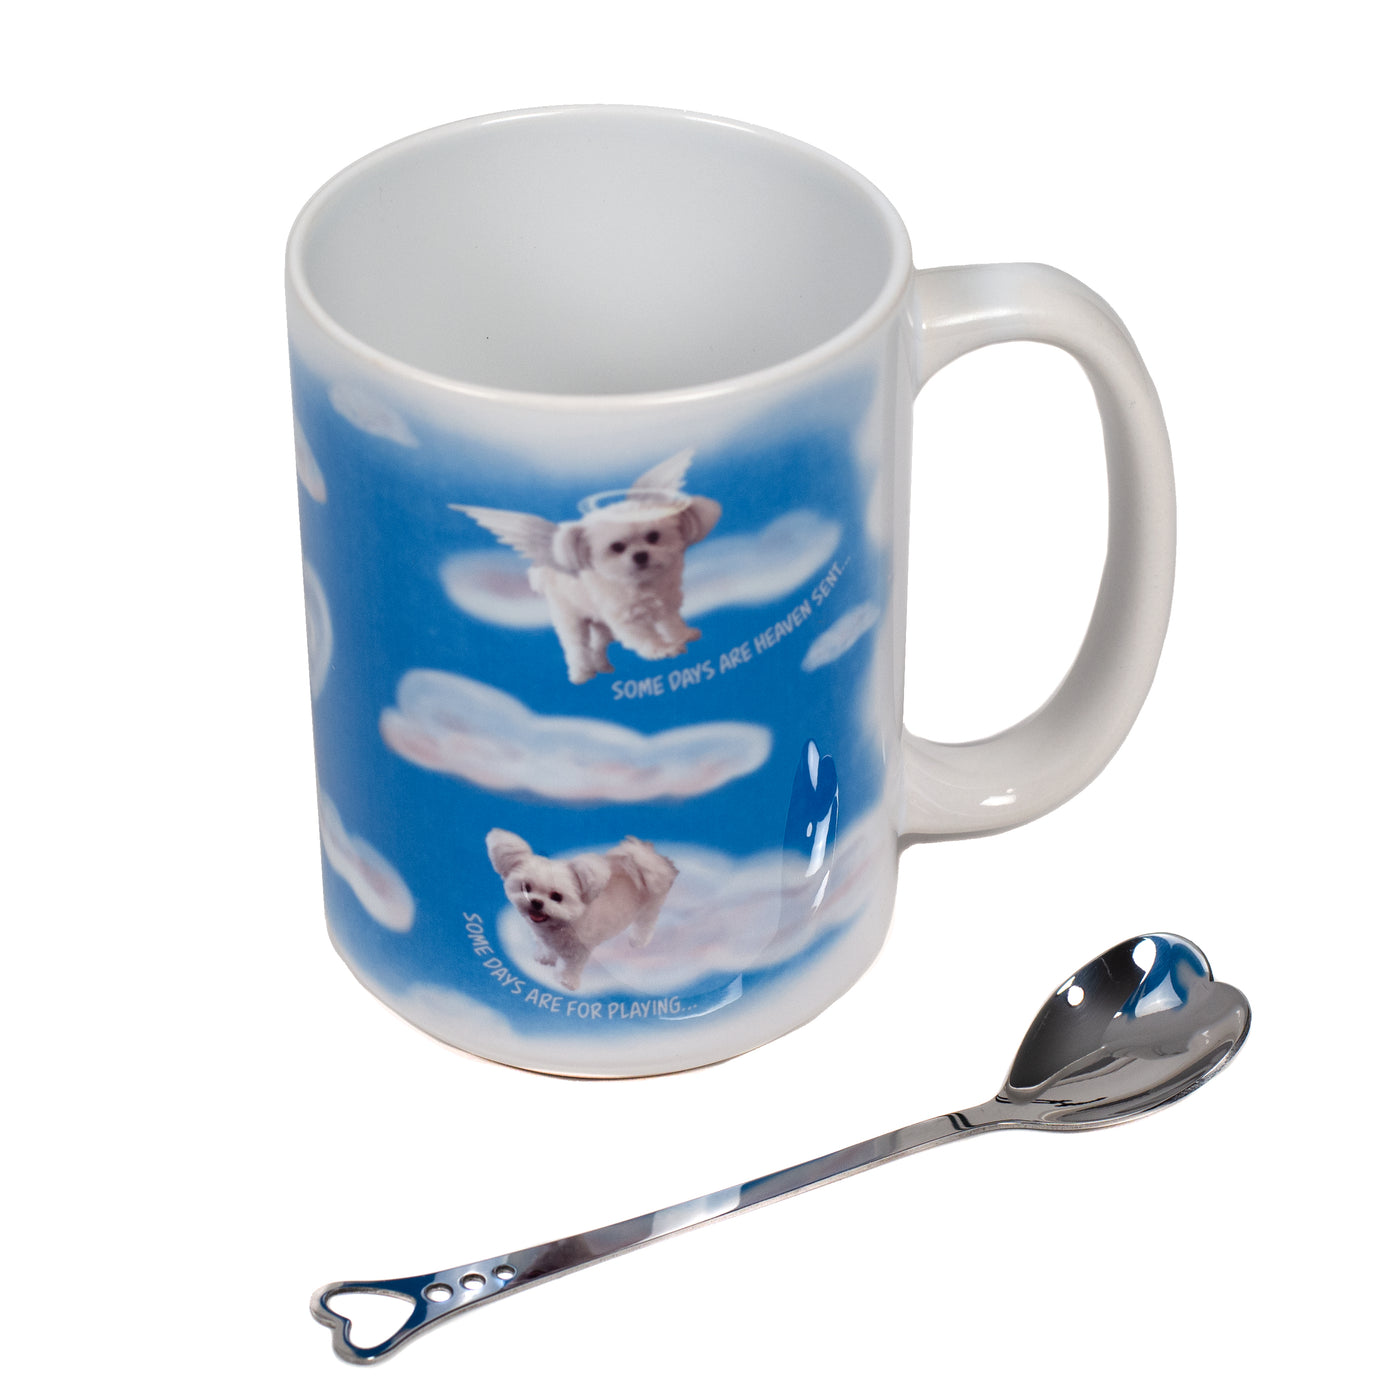 Coffee on Cloud 9 Mug - - Unique Gifts | Healing Hearts Journey